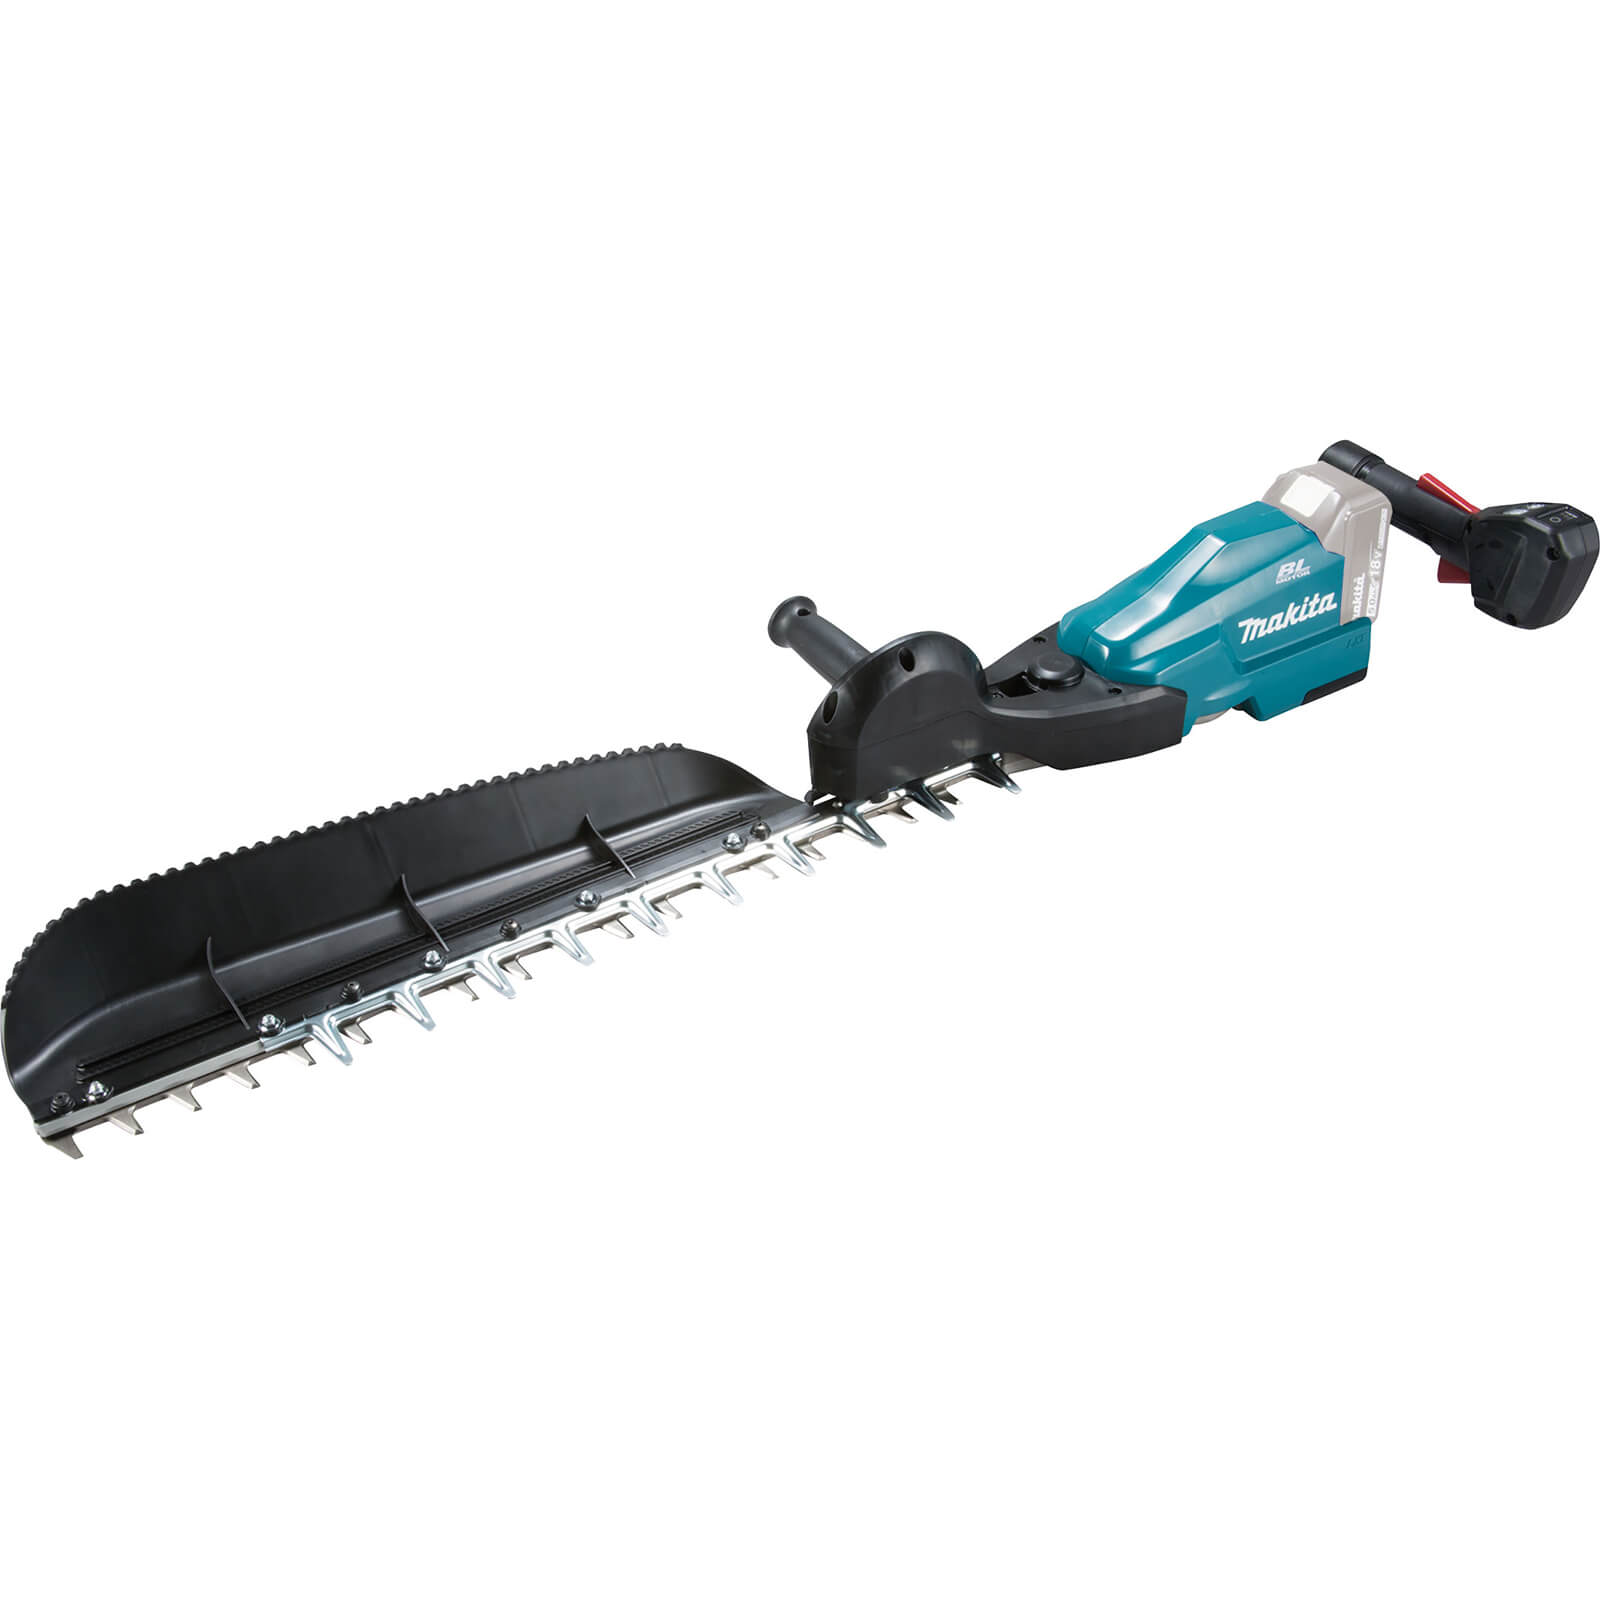 Makita DUH604S 18v LXT Cordless Brushless Hedge Trimmer 600mm No Batteries No Charger